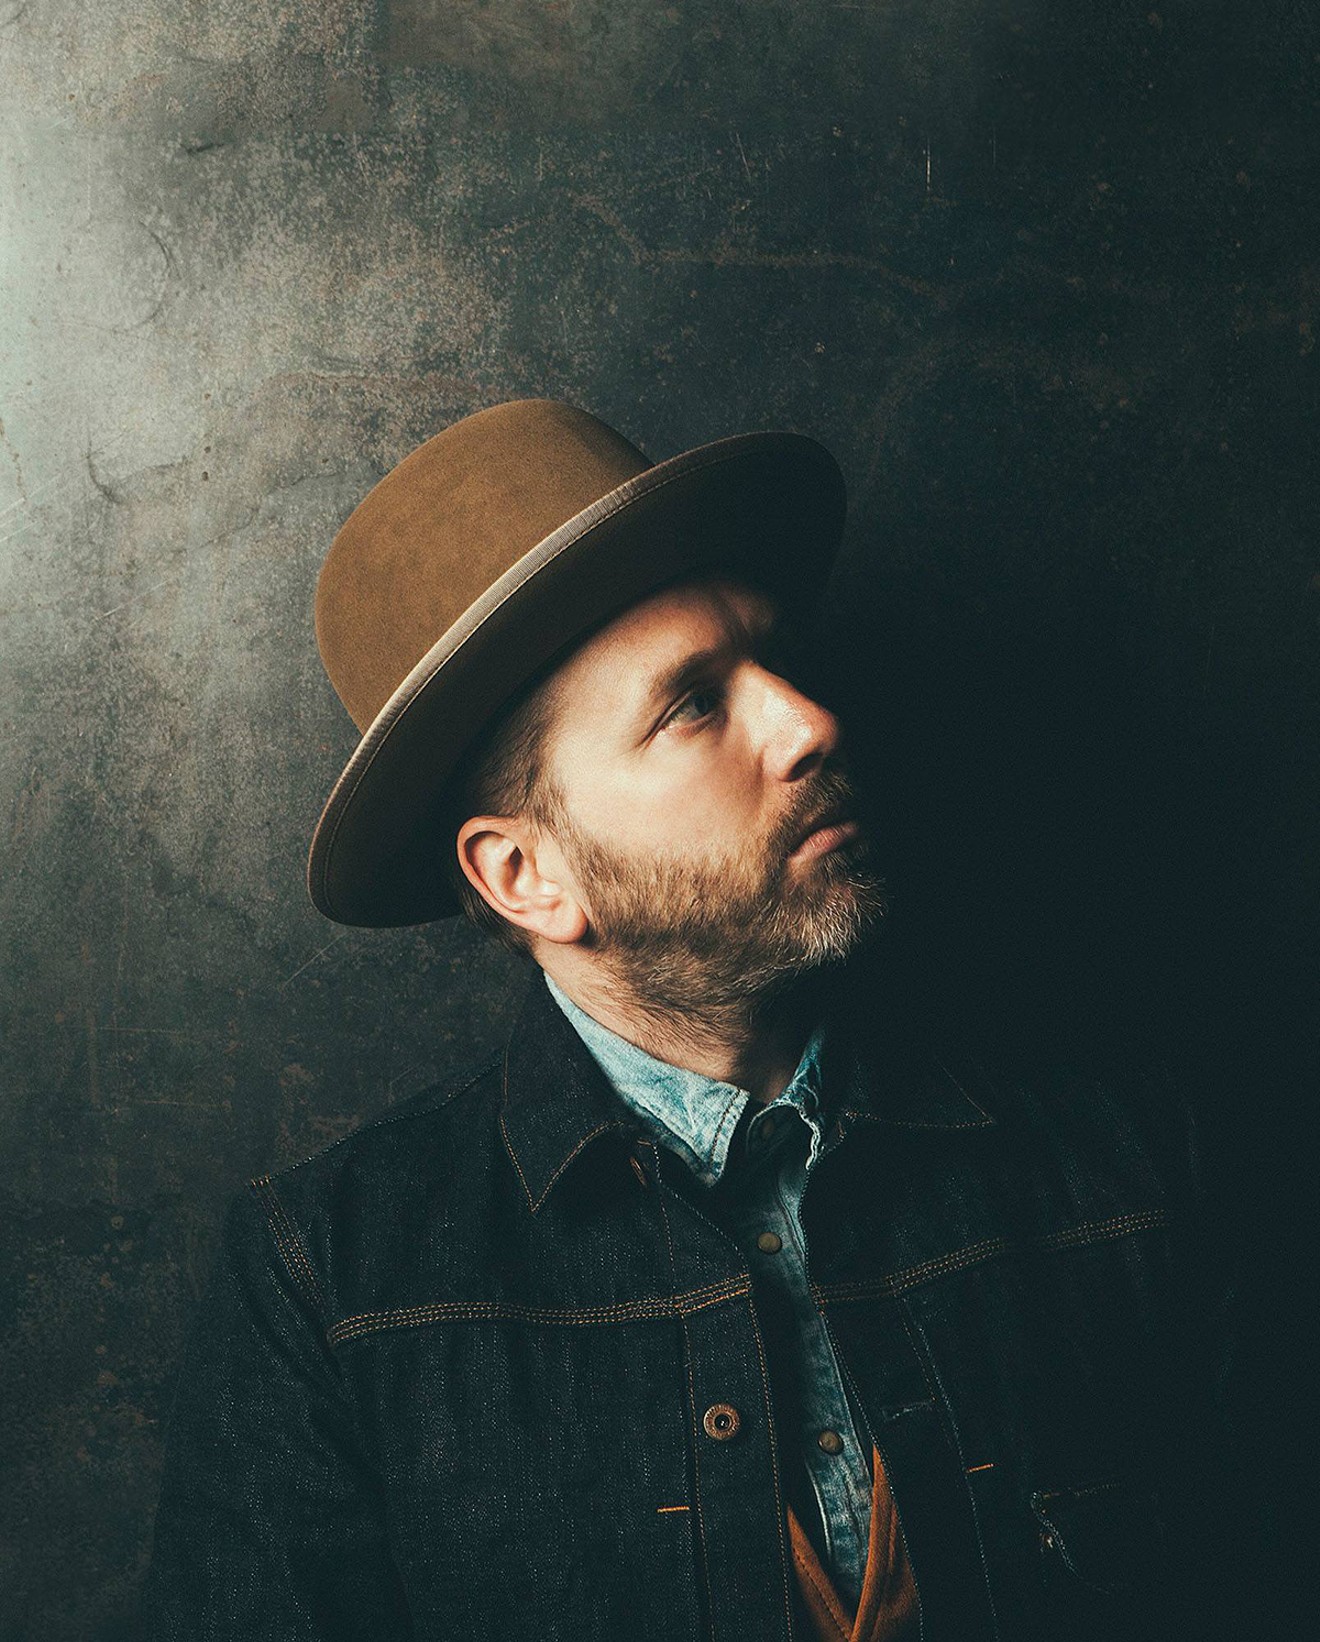 Dallas Green is City and Colour.